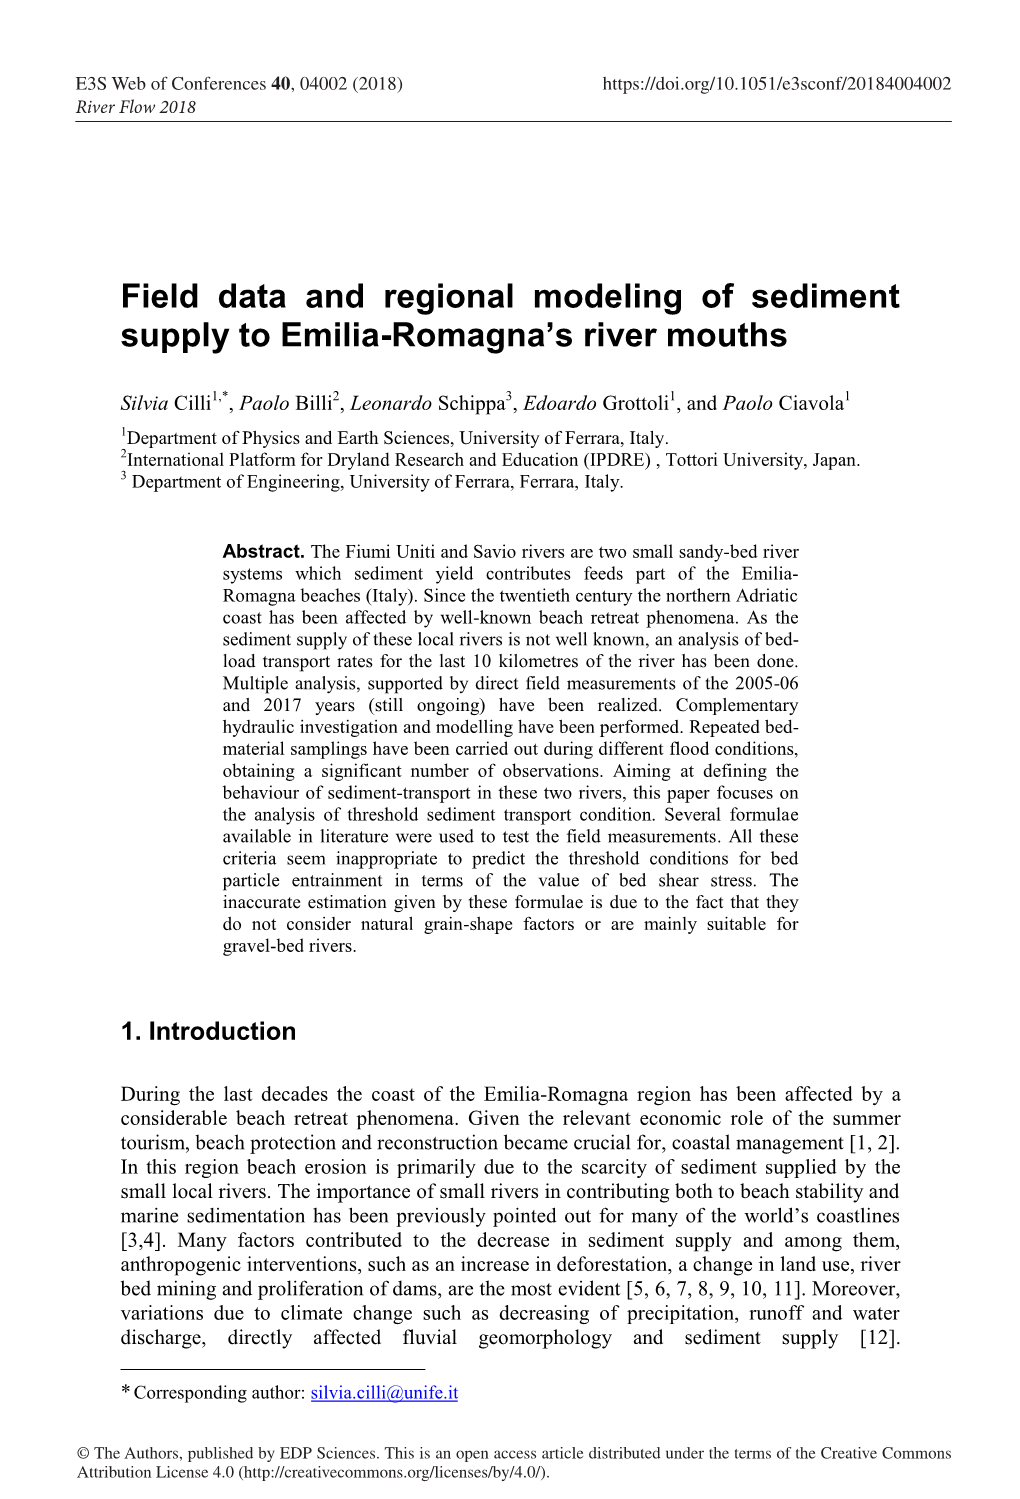 Field Data and Regional Modeling of Sediment Supply to Emilia-Romagna’S River Mouths